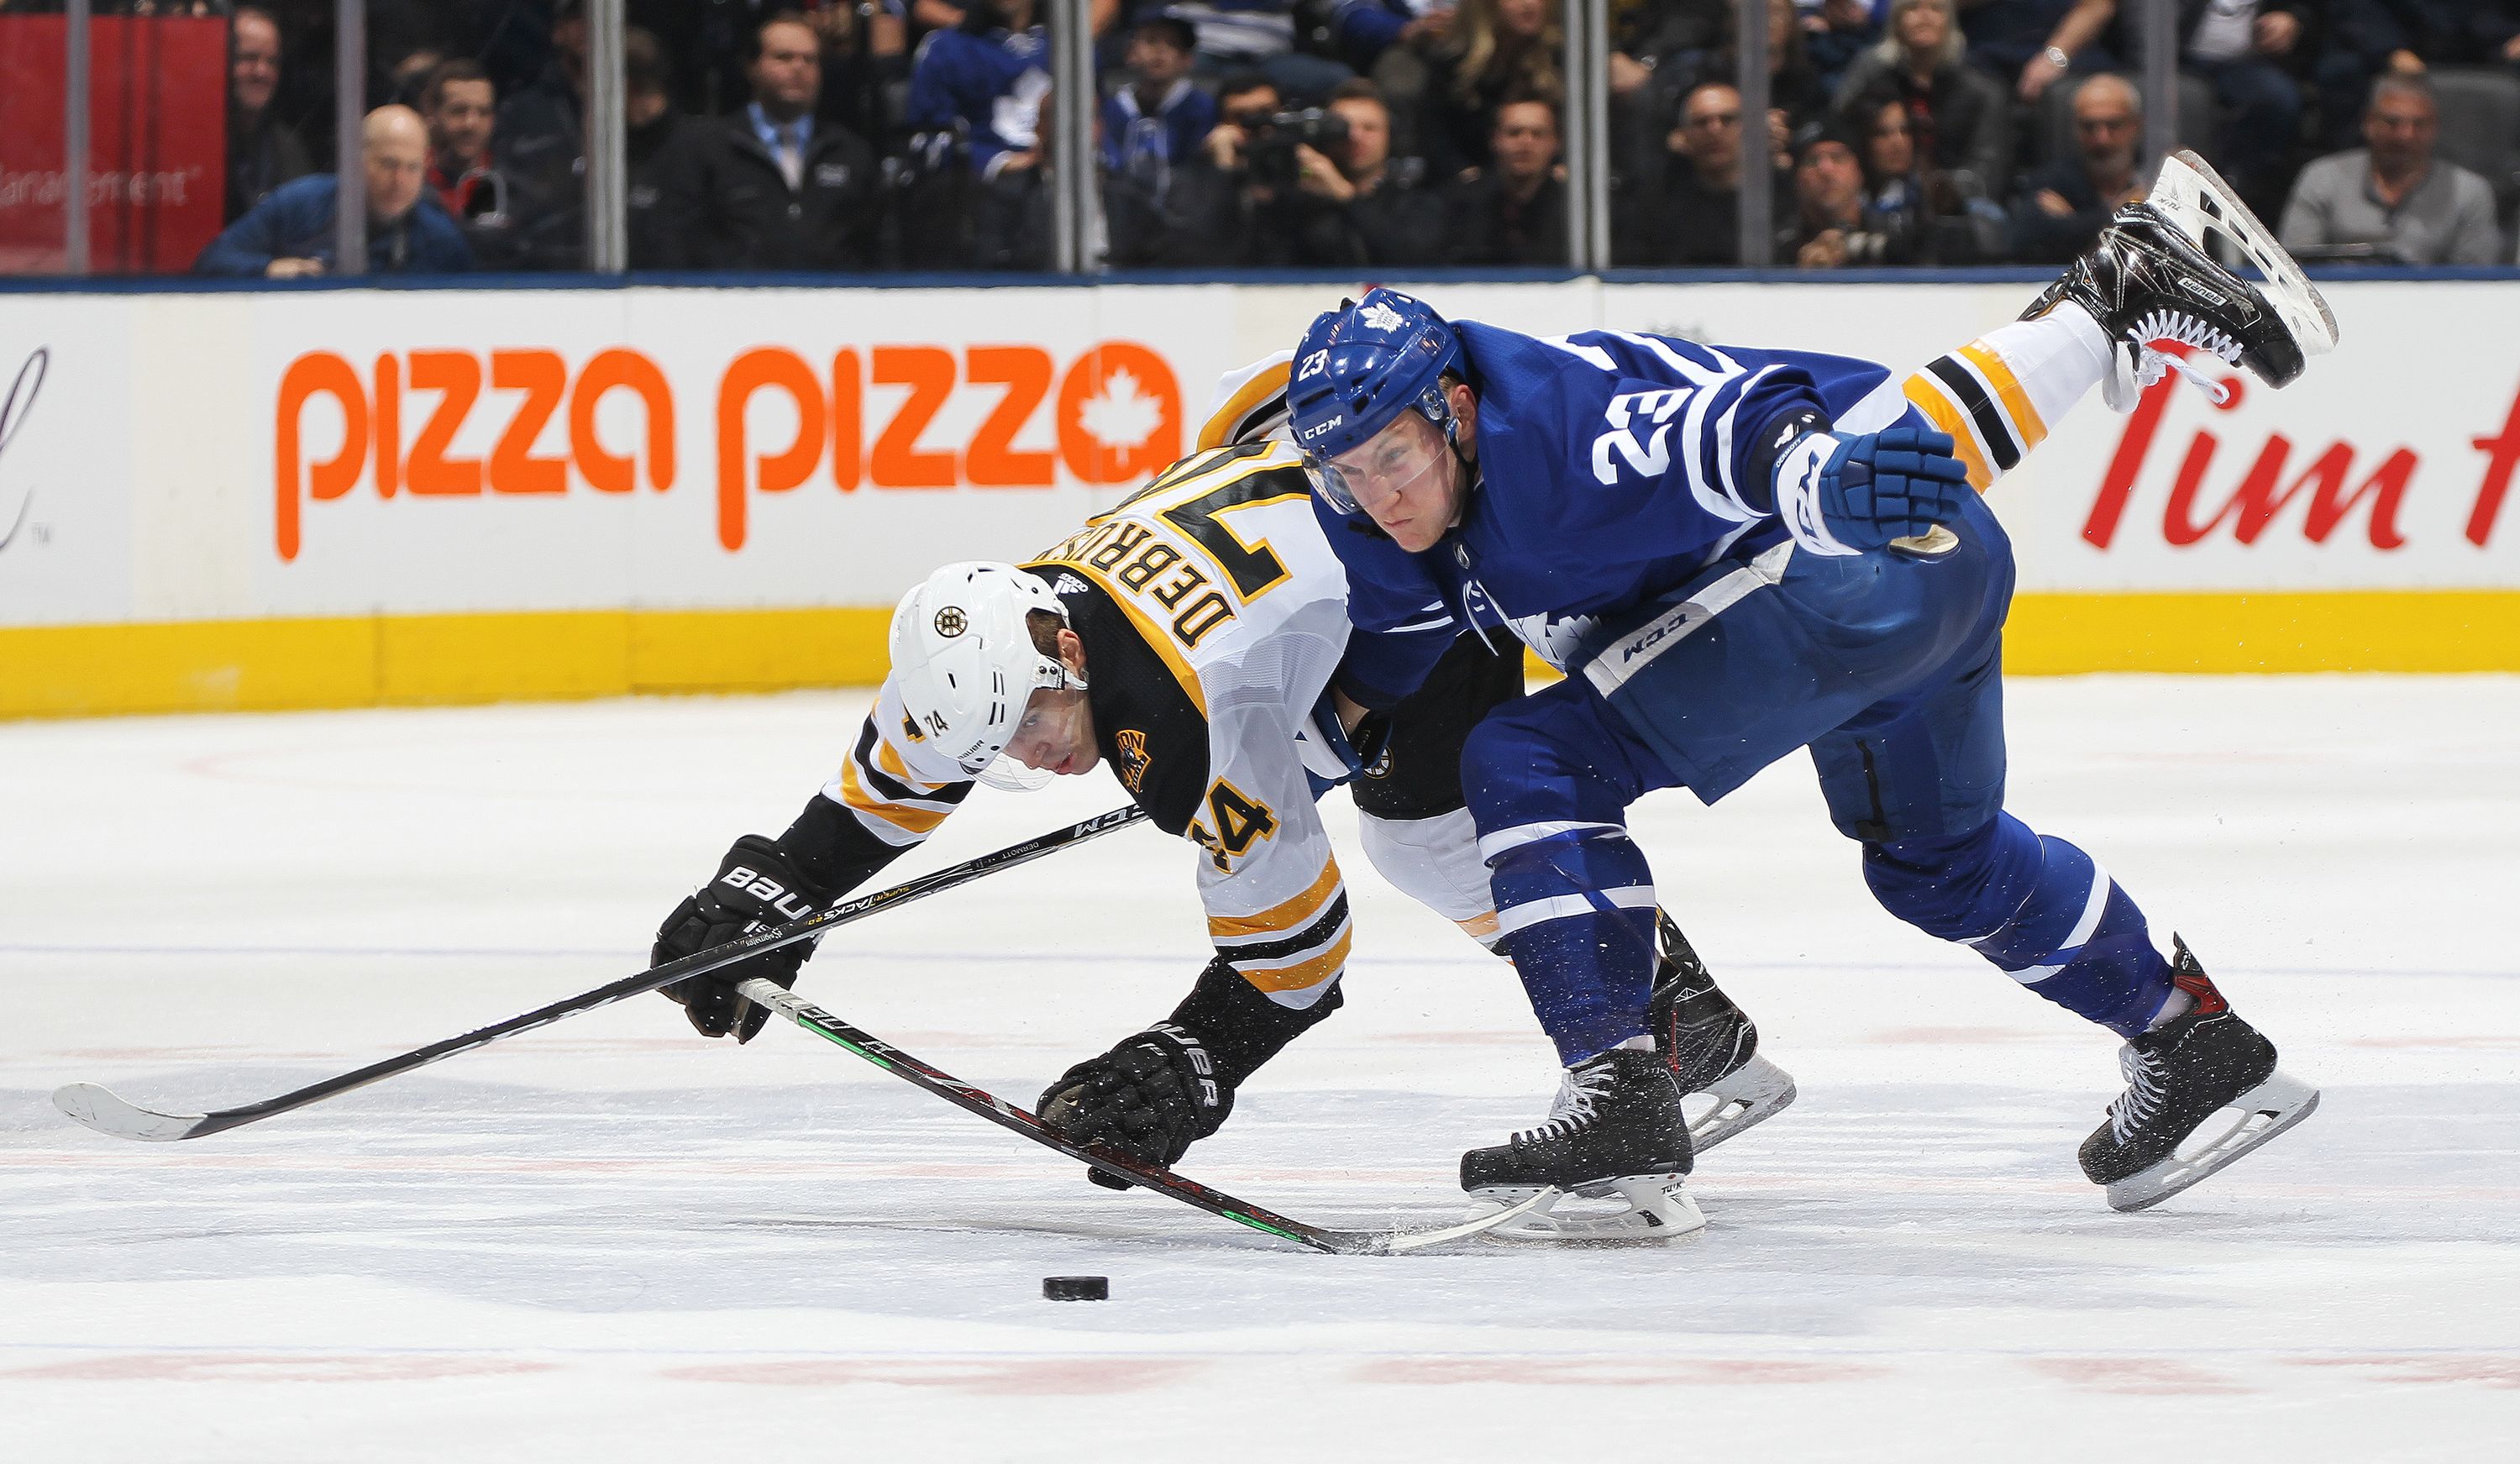 Maple Leafs-Bruins rivalry done for now, as first-round playoff matchup ...